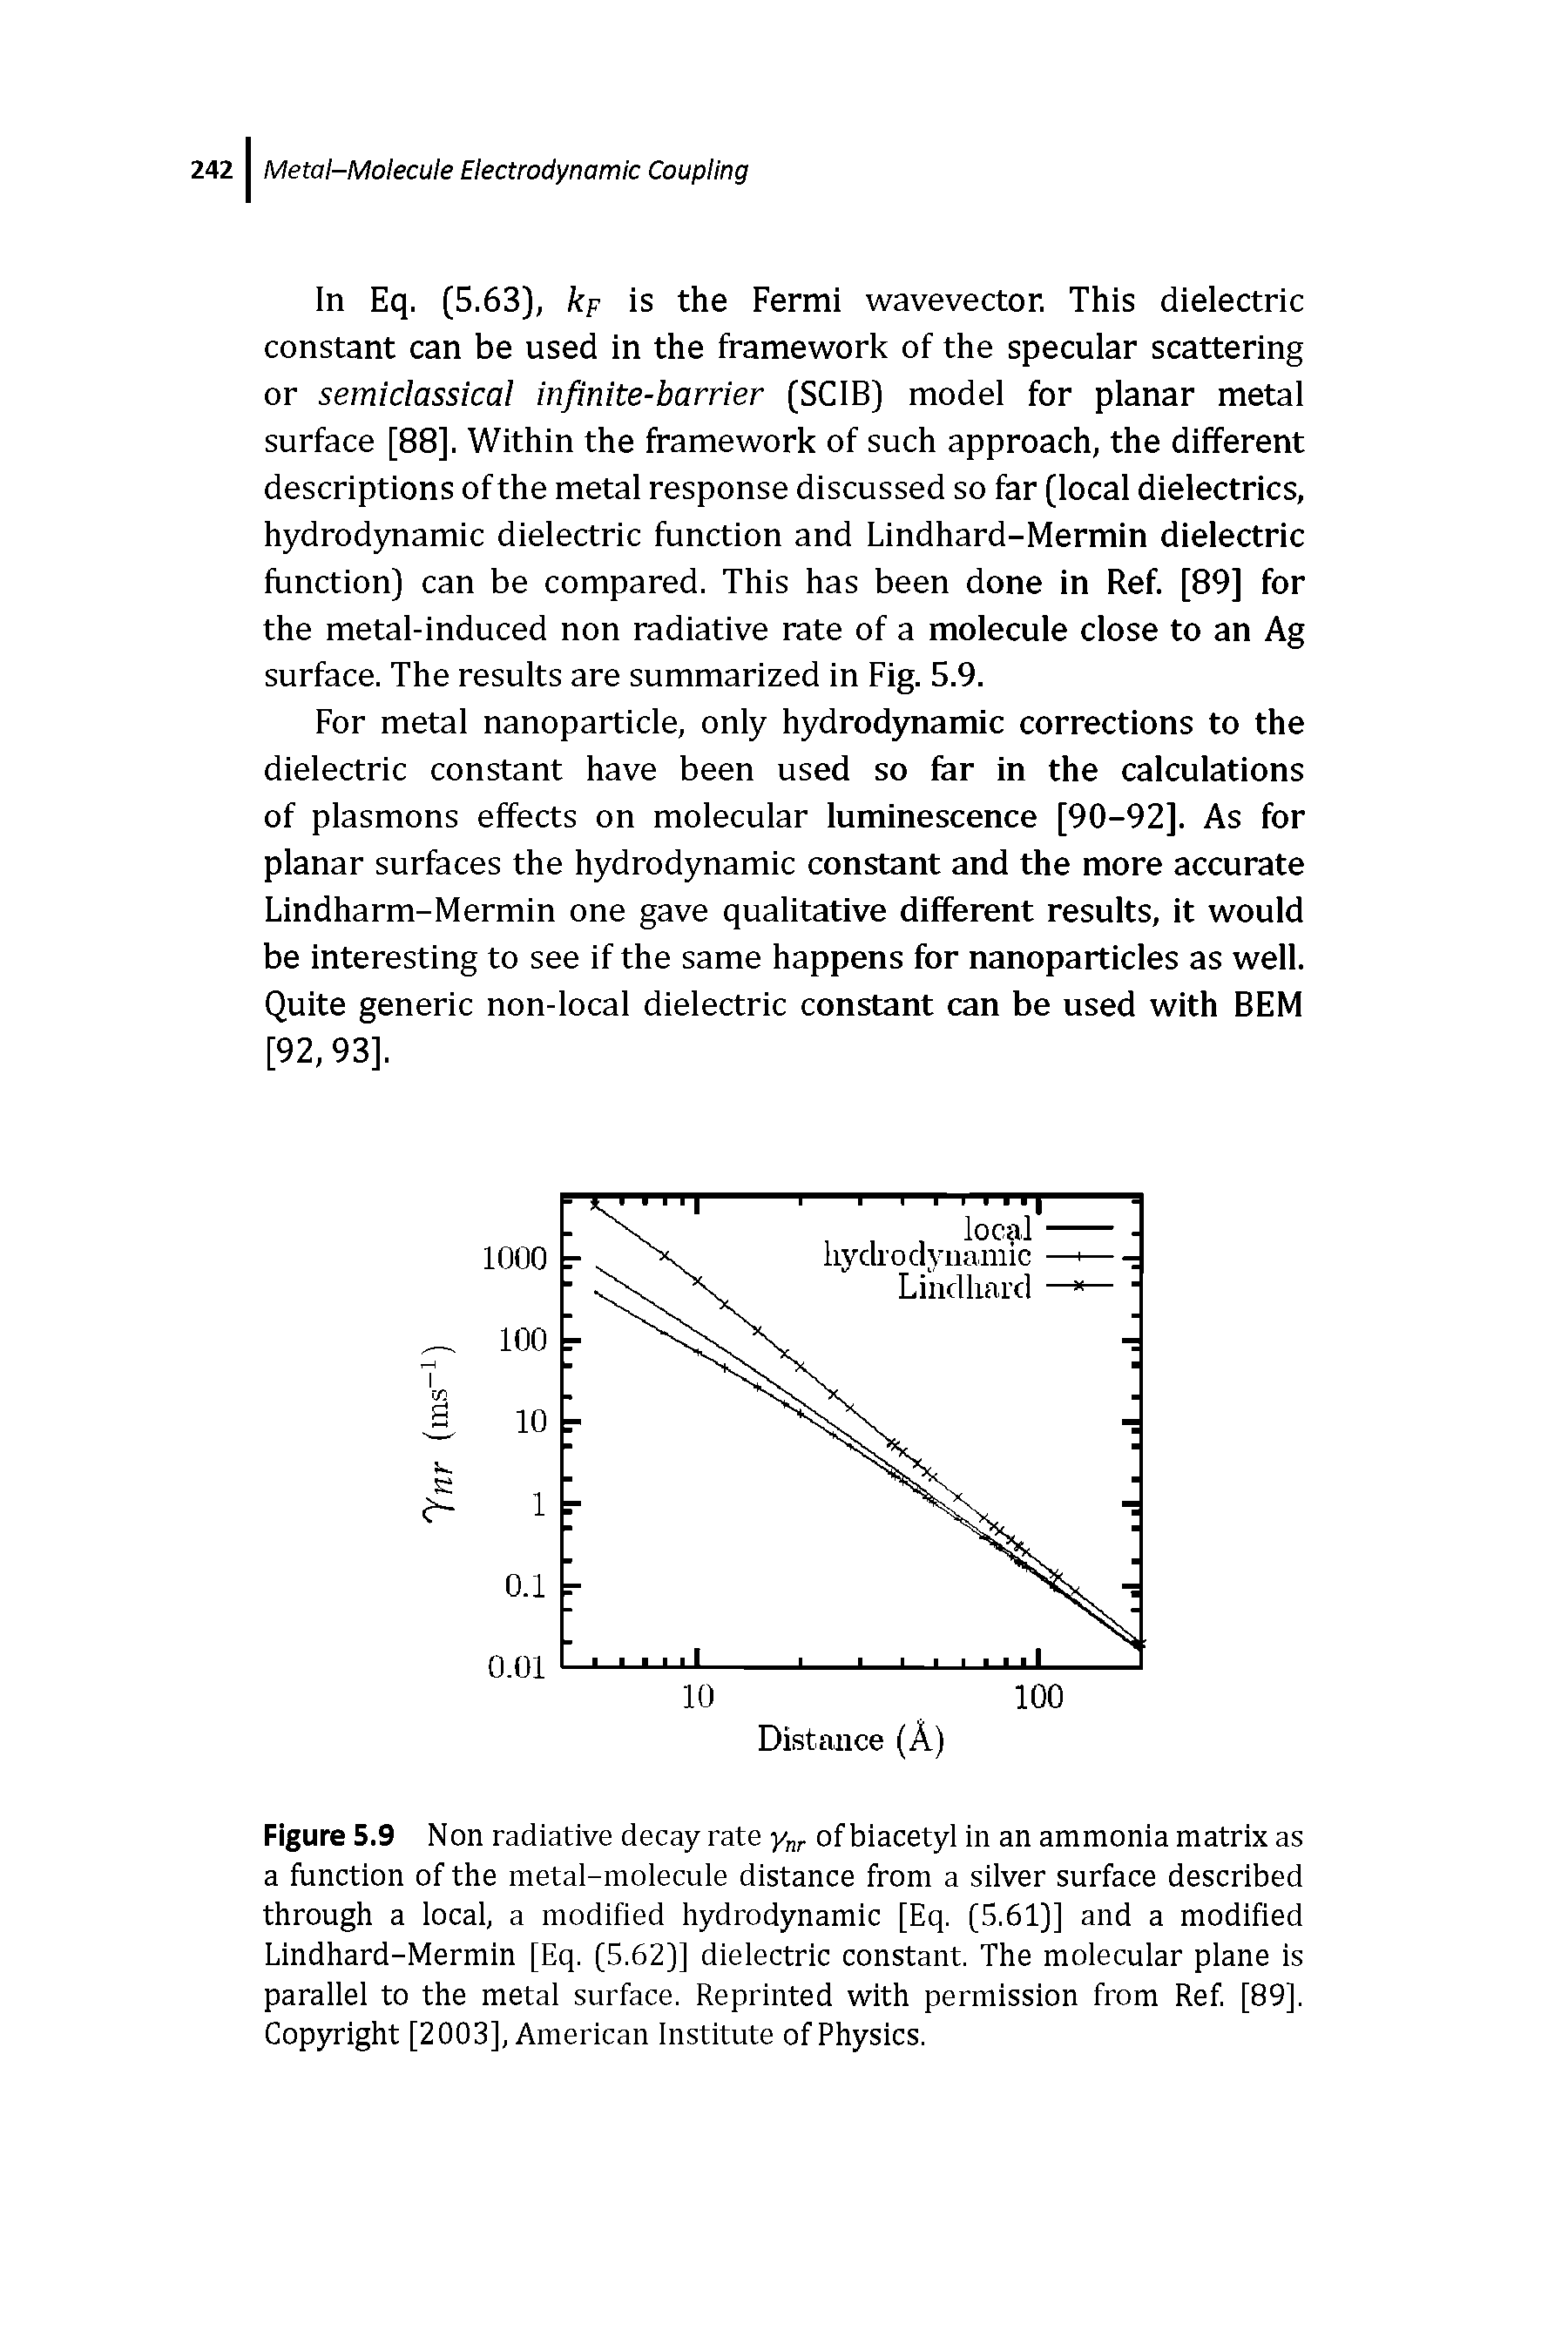 Figure 5.9 Non radiative decay rate Ynr of biacetyl in an ammonia matrix as a function of the metal-molecule distance from a silver surface described through a local, a modified hydrodynamic [Eq. (5.61)] and a modified Lindhard-Mermin [Eq. (5.62)] dielectric constant. The molecular plane is parallel to the metal surface. Reprinted with permission from Ref [89]. Cop5n lght [2003], American Institute of Physics.